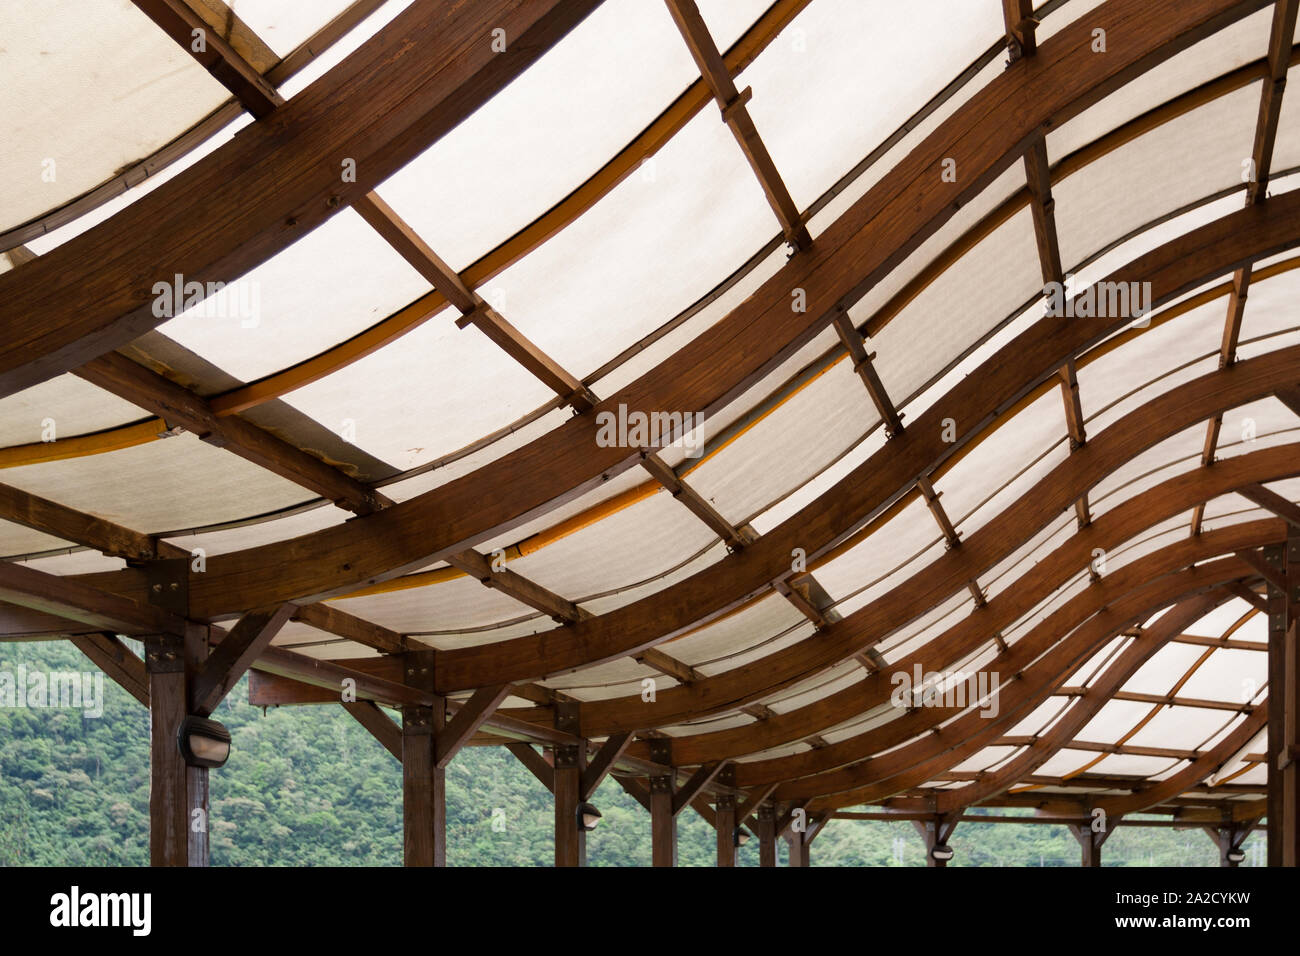 Wood beams roof structure with S curve shape, covered with polycarbonate  sheet Stock Photo - Alamy